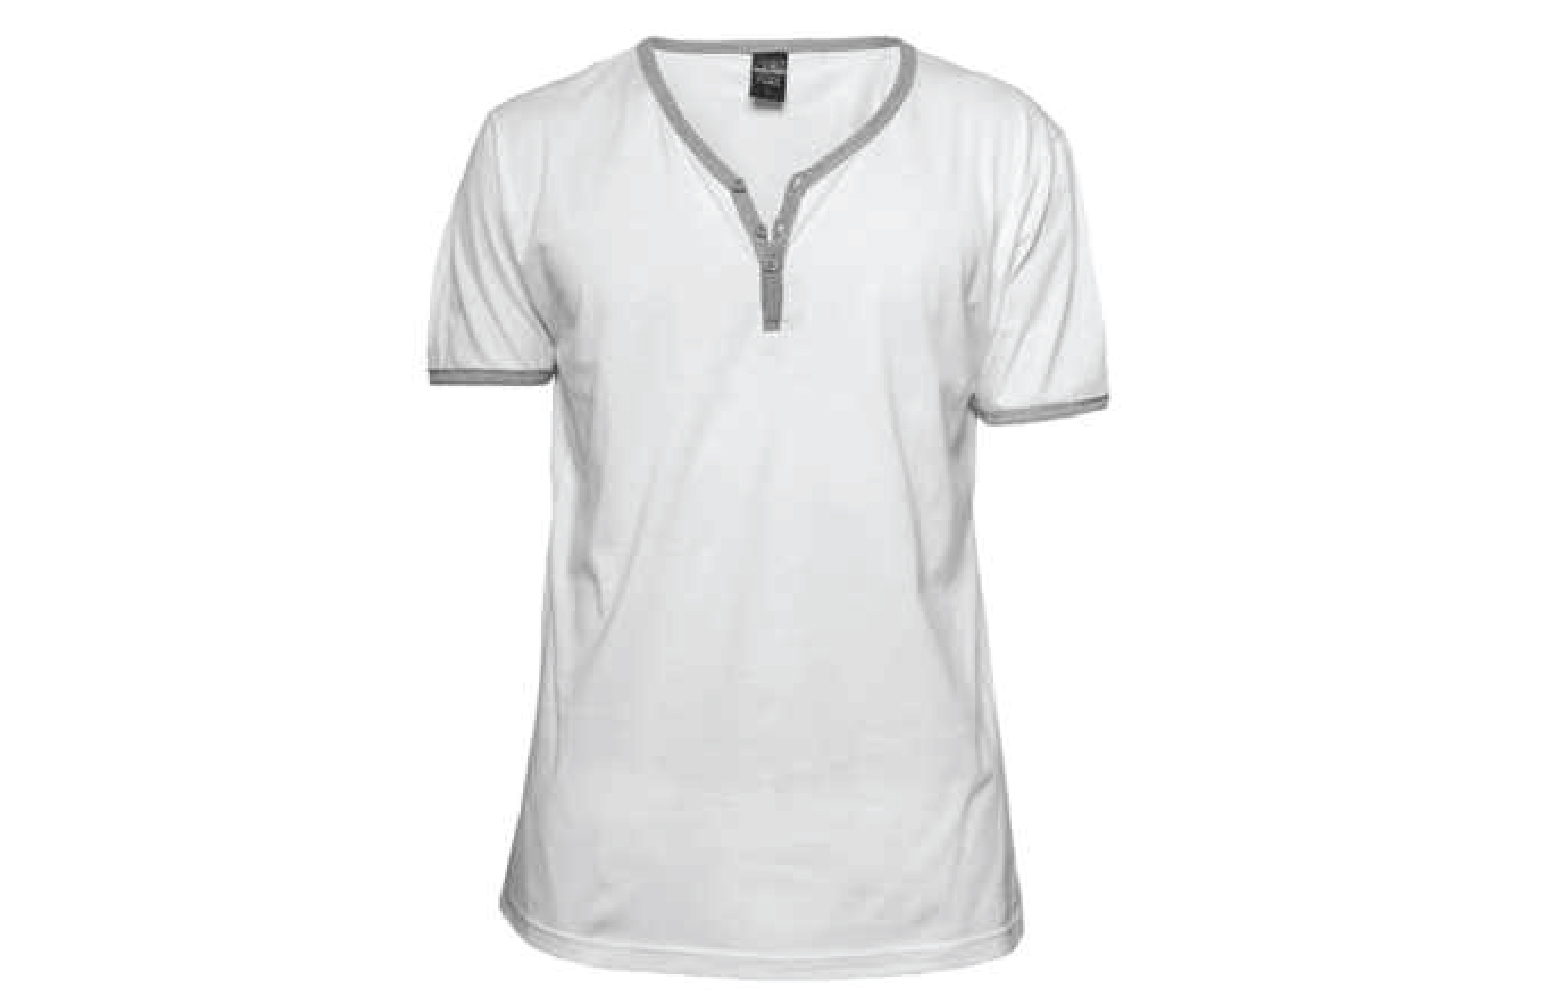 Y Neck Style T Shirt